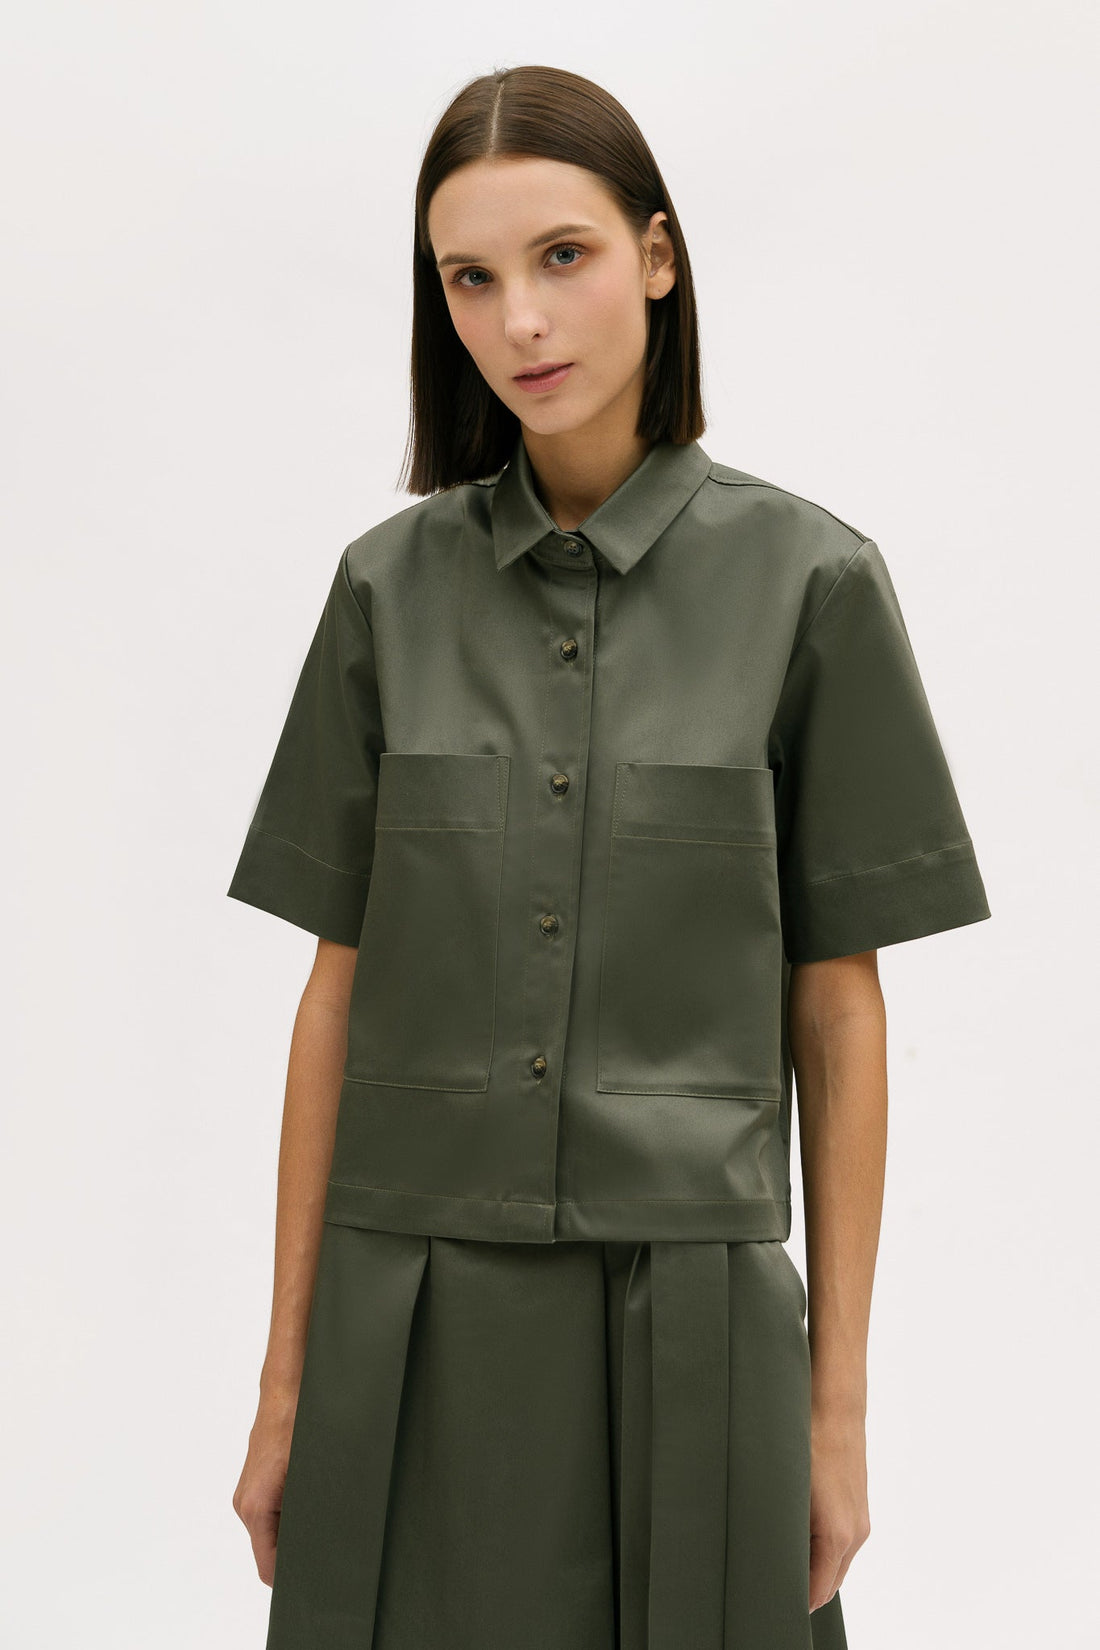 A woman with shoulder length brown hair is wearing a green utility shirt